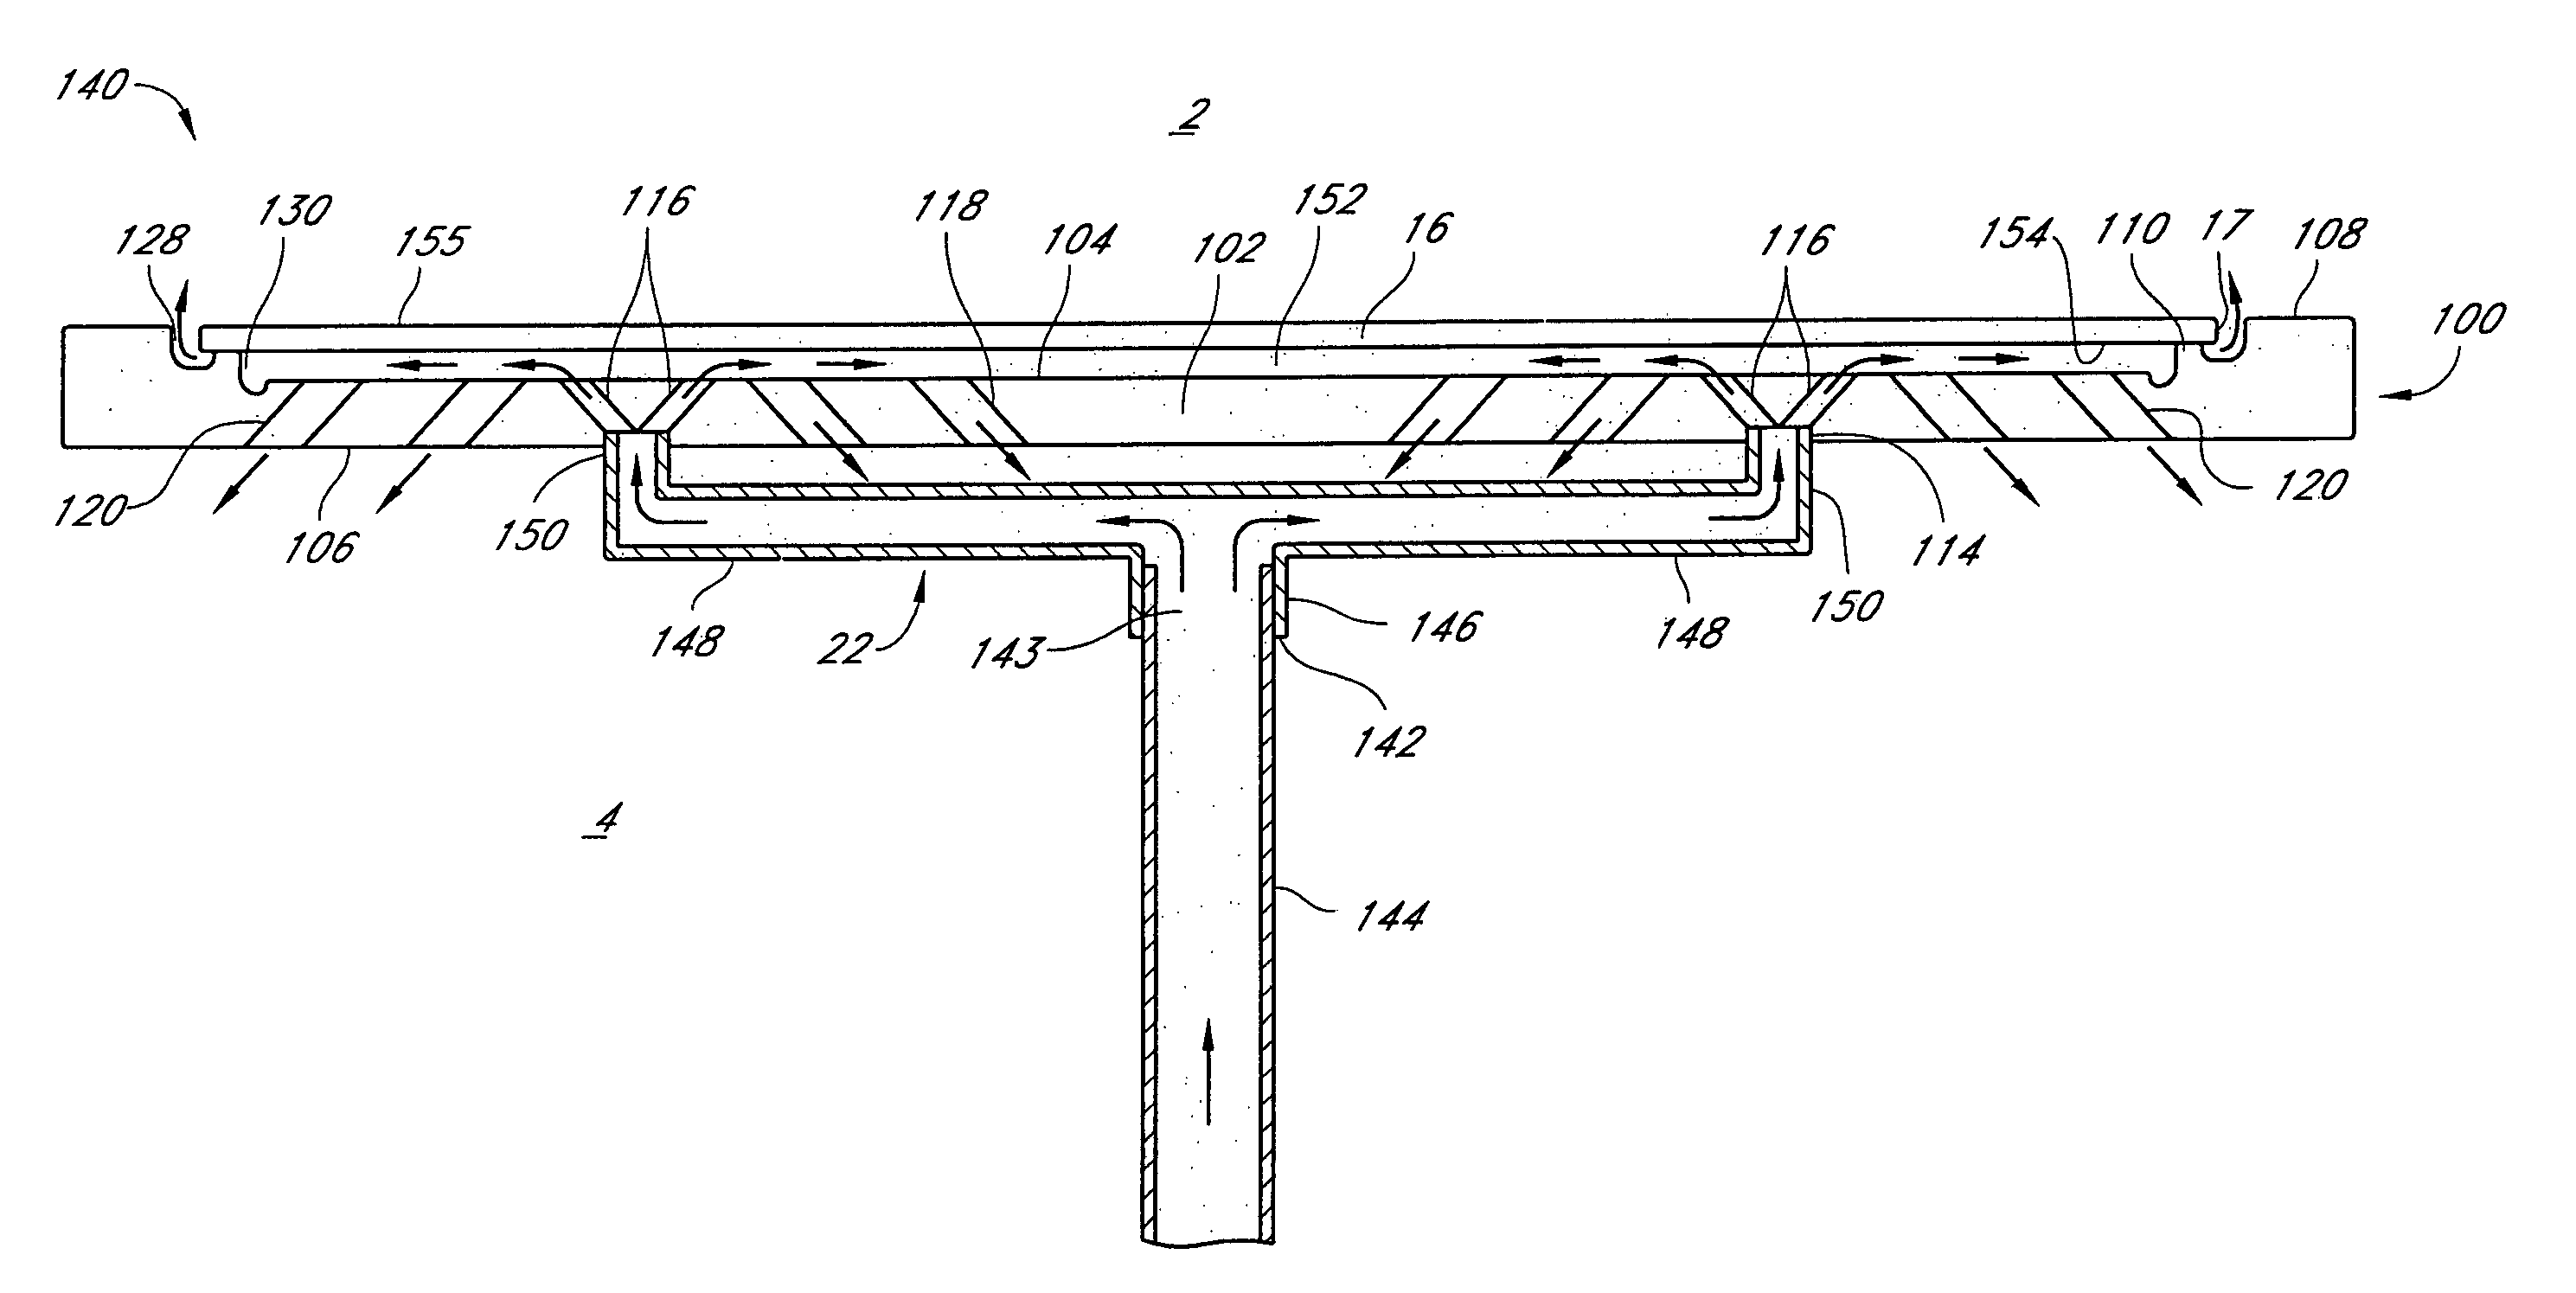 Substrate support system for reduced autodoping and backside deposition